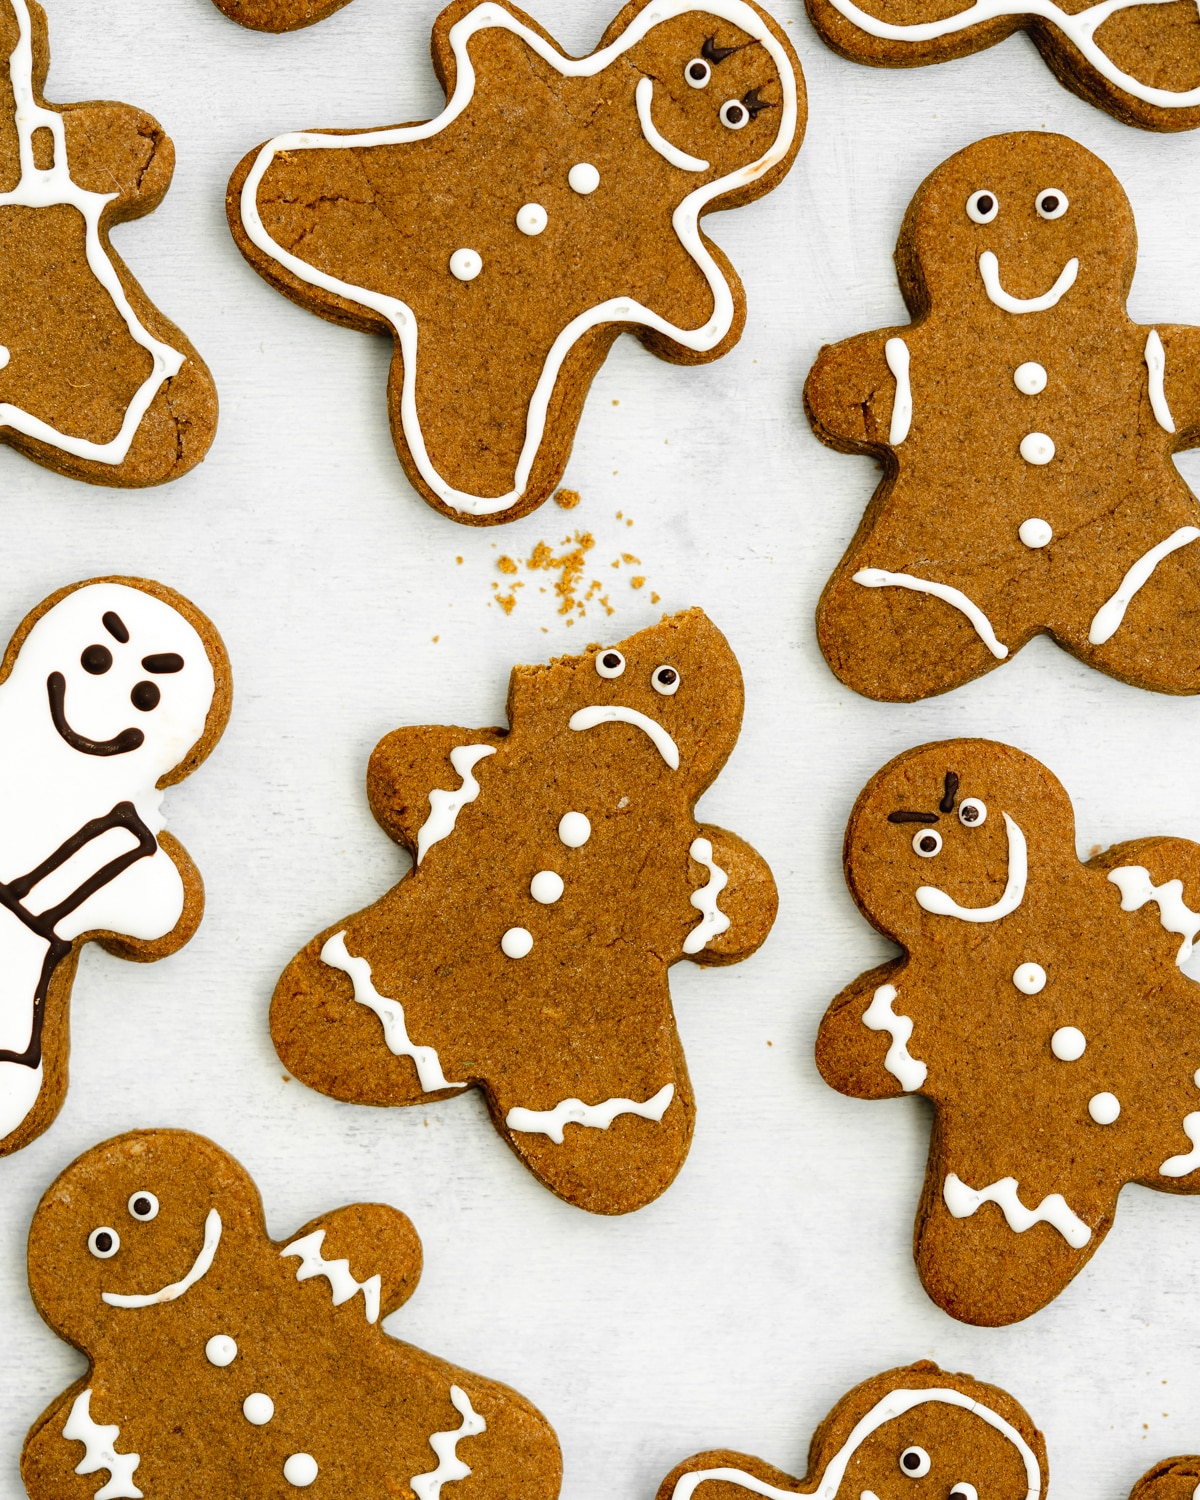 gingerbread men with different facial expressions on a grey surface.